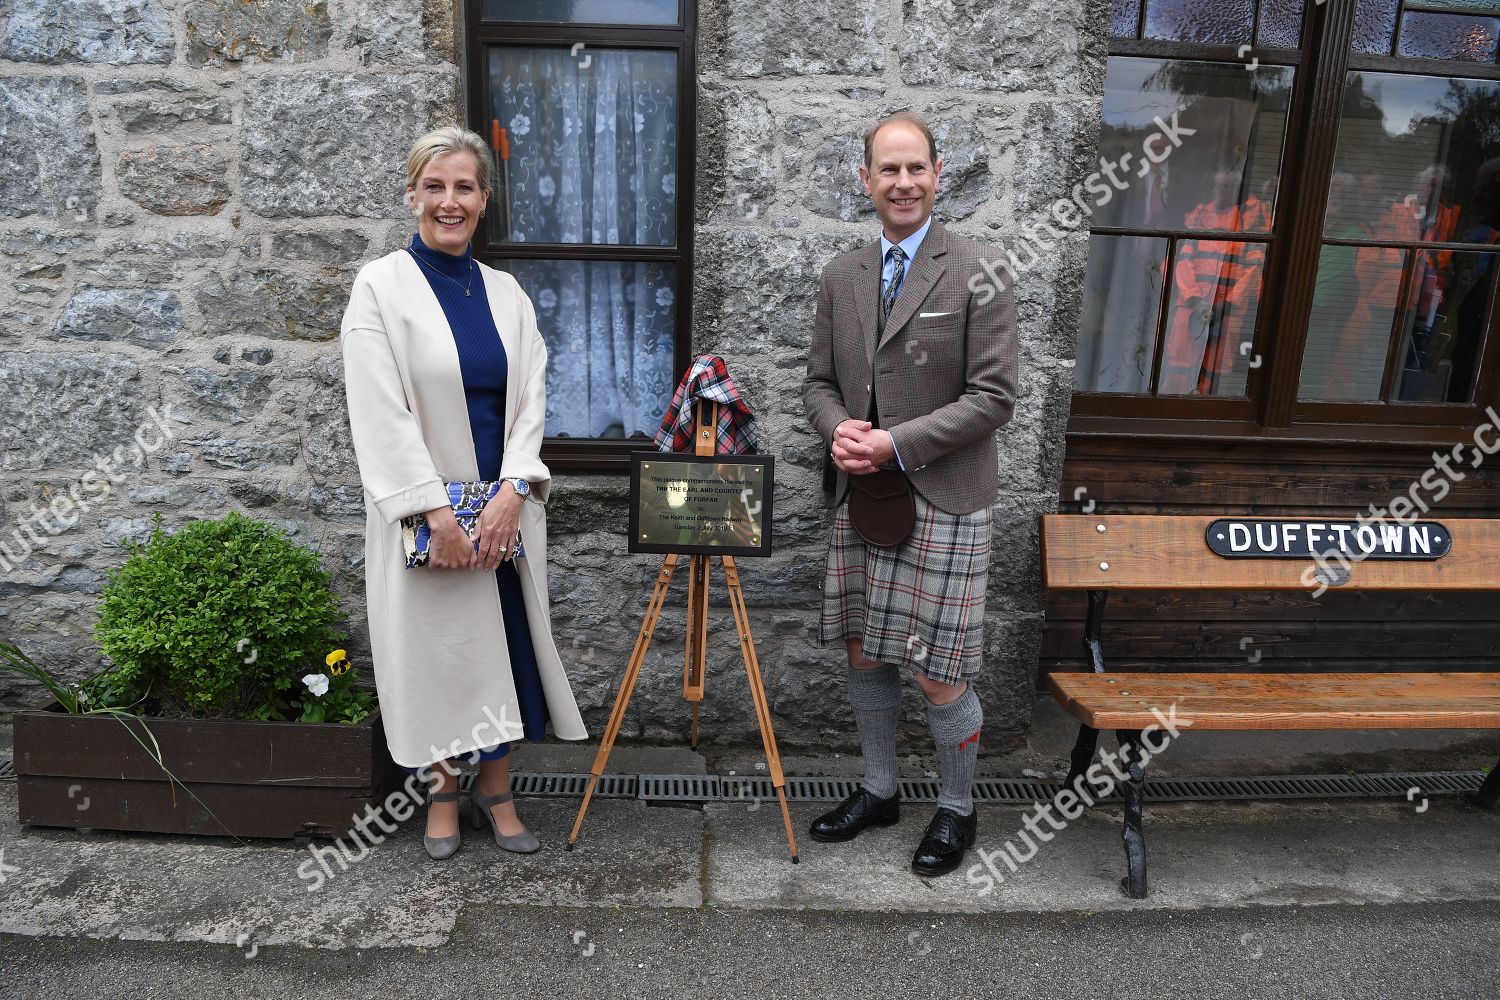 CASA REAL BRITÁNICA - Página 93 Sophie-countess-of-wessex-and-prince-edward-visit-to-scotland-uk-shutterstock-editorial-10326116cc